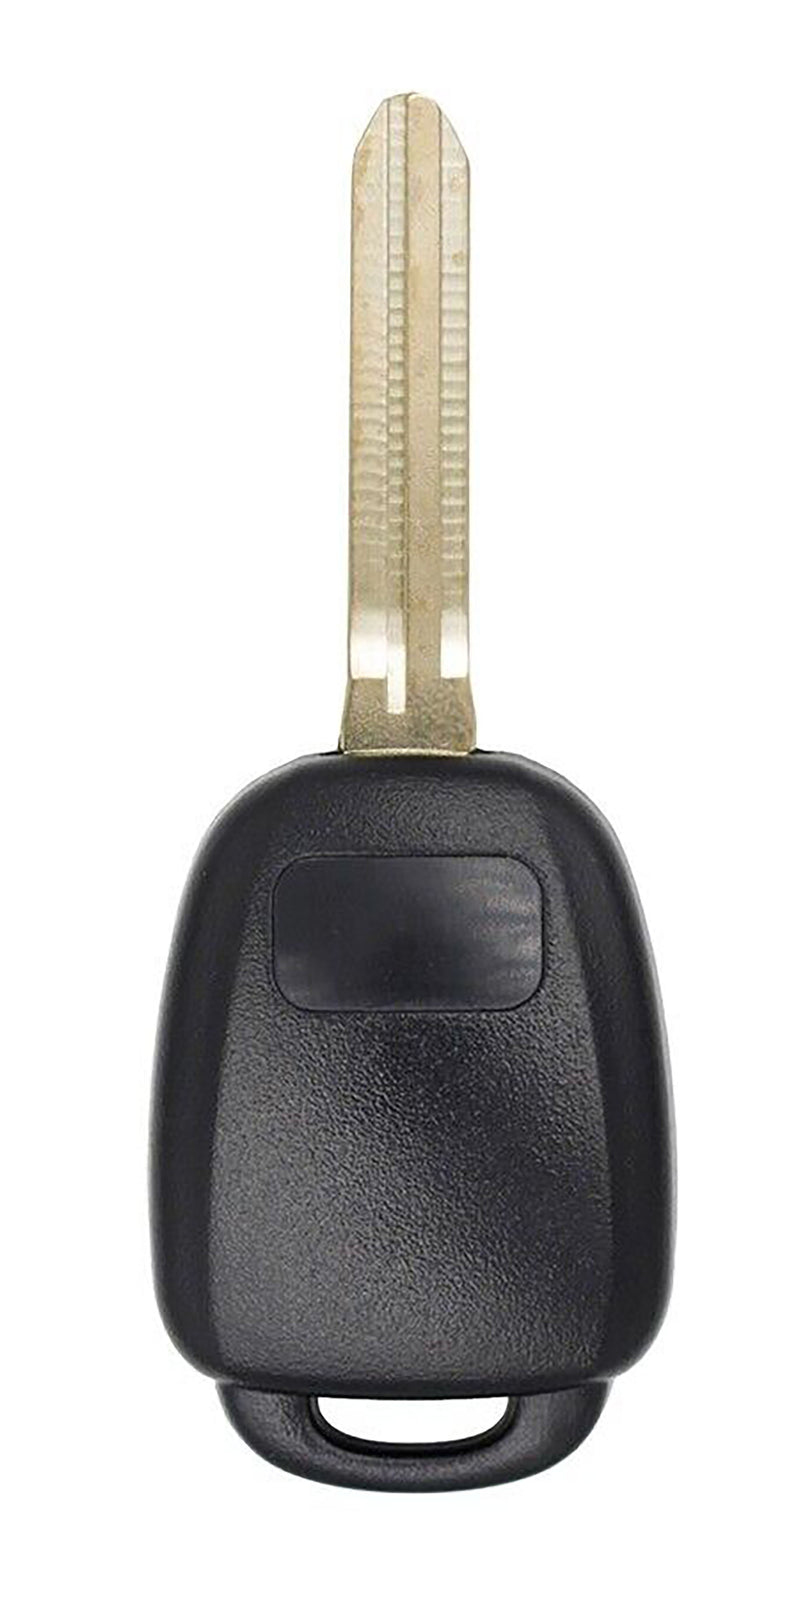 1x New Replacement Key Fob Compatible with & Fit For Scion MOZB52TH G Chip (Read Description) - MPN MOZB52TH-02